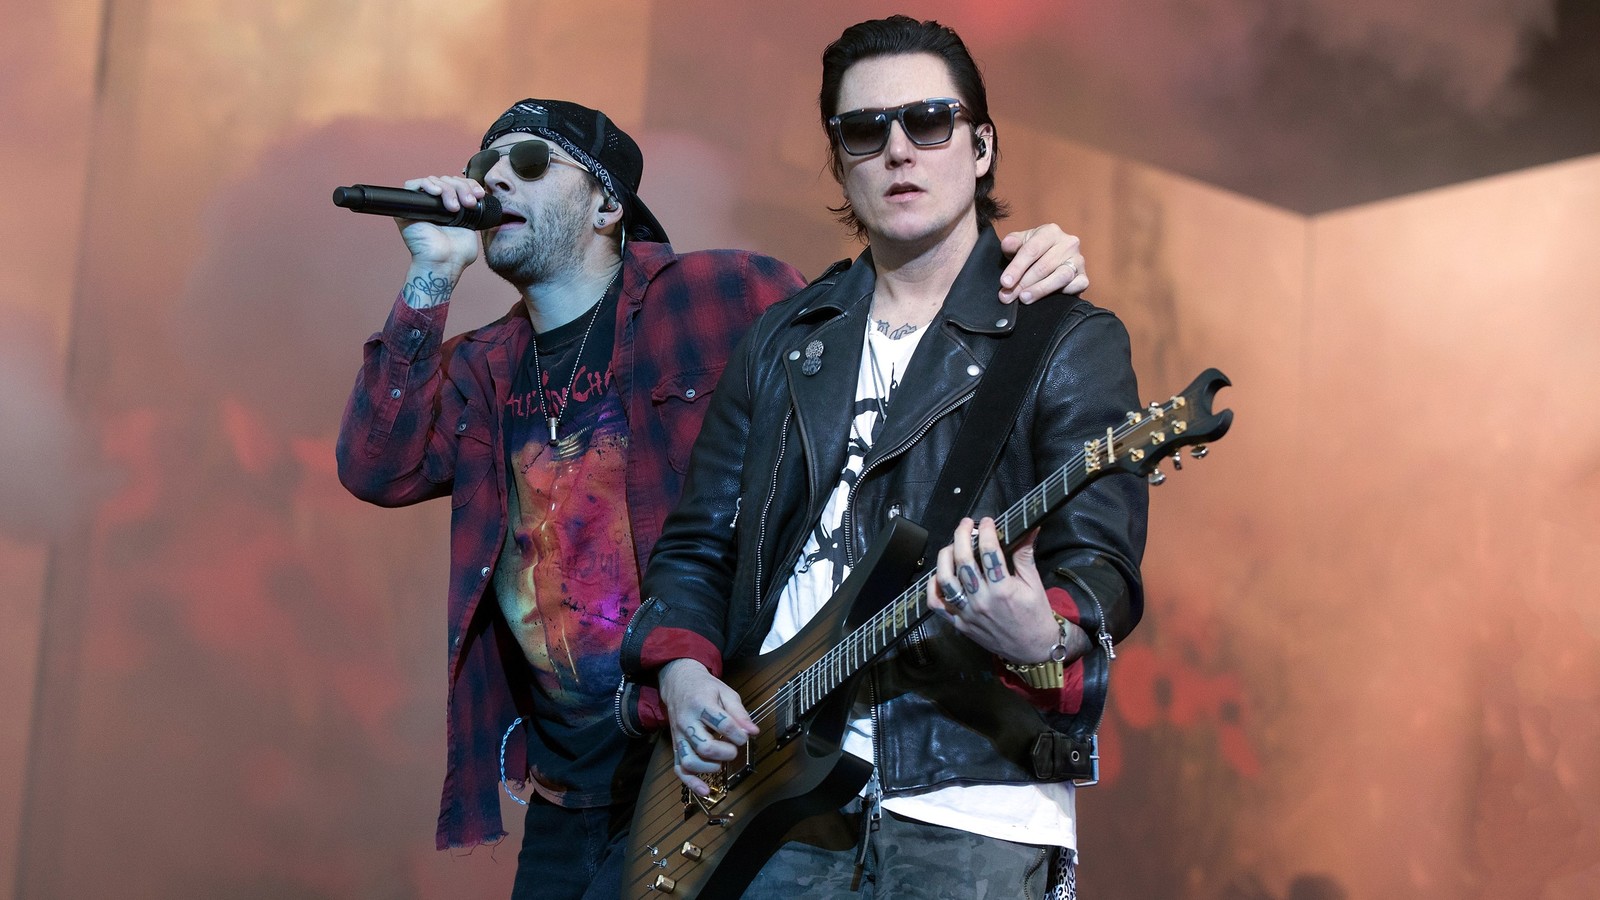 avenged sevenfold north american tour with falling in reverse setlist